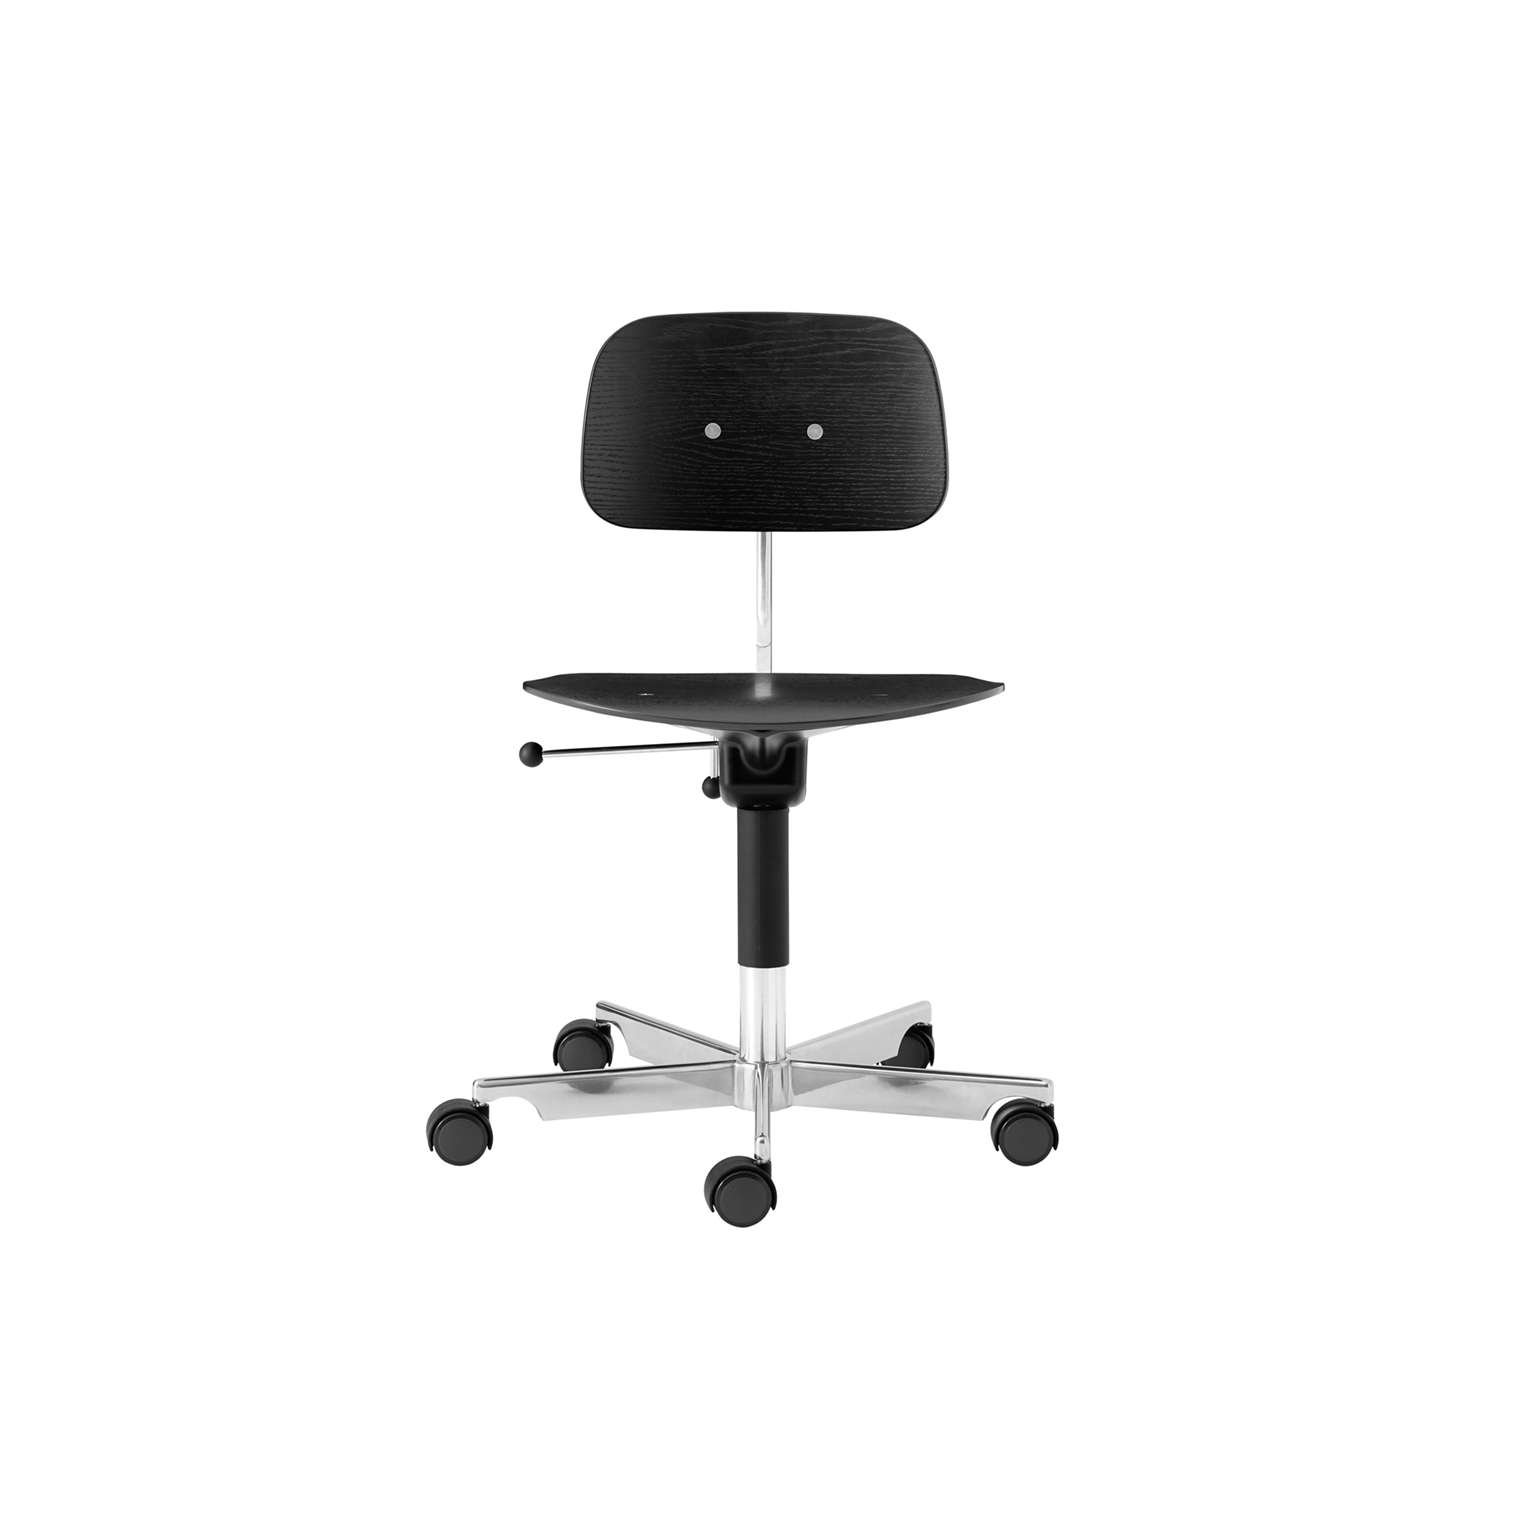 Kevi 2543 office chair